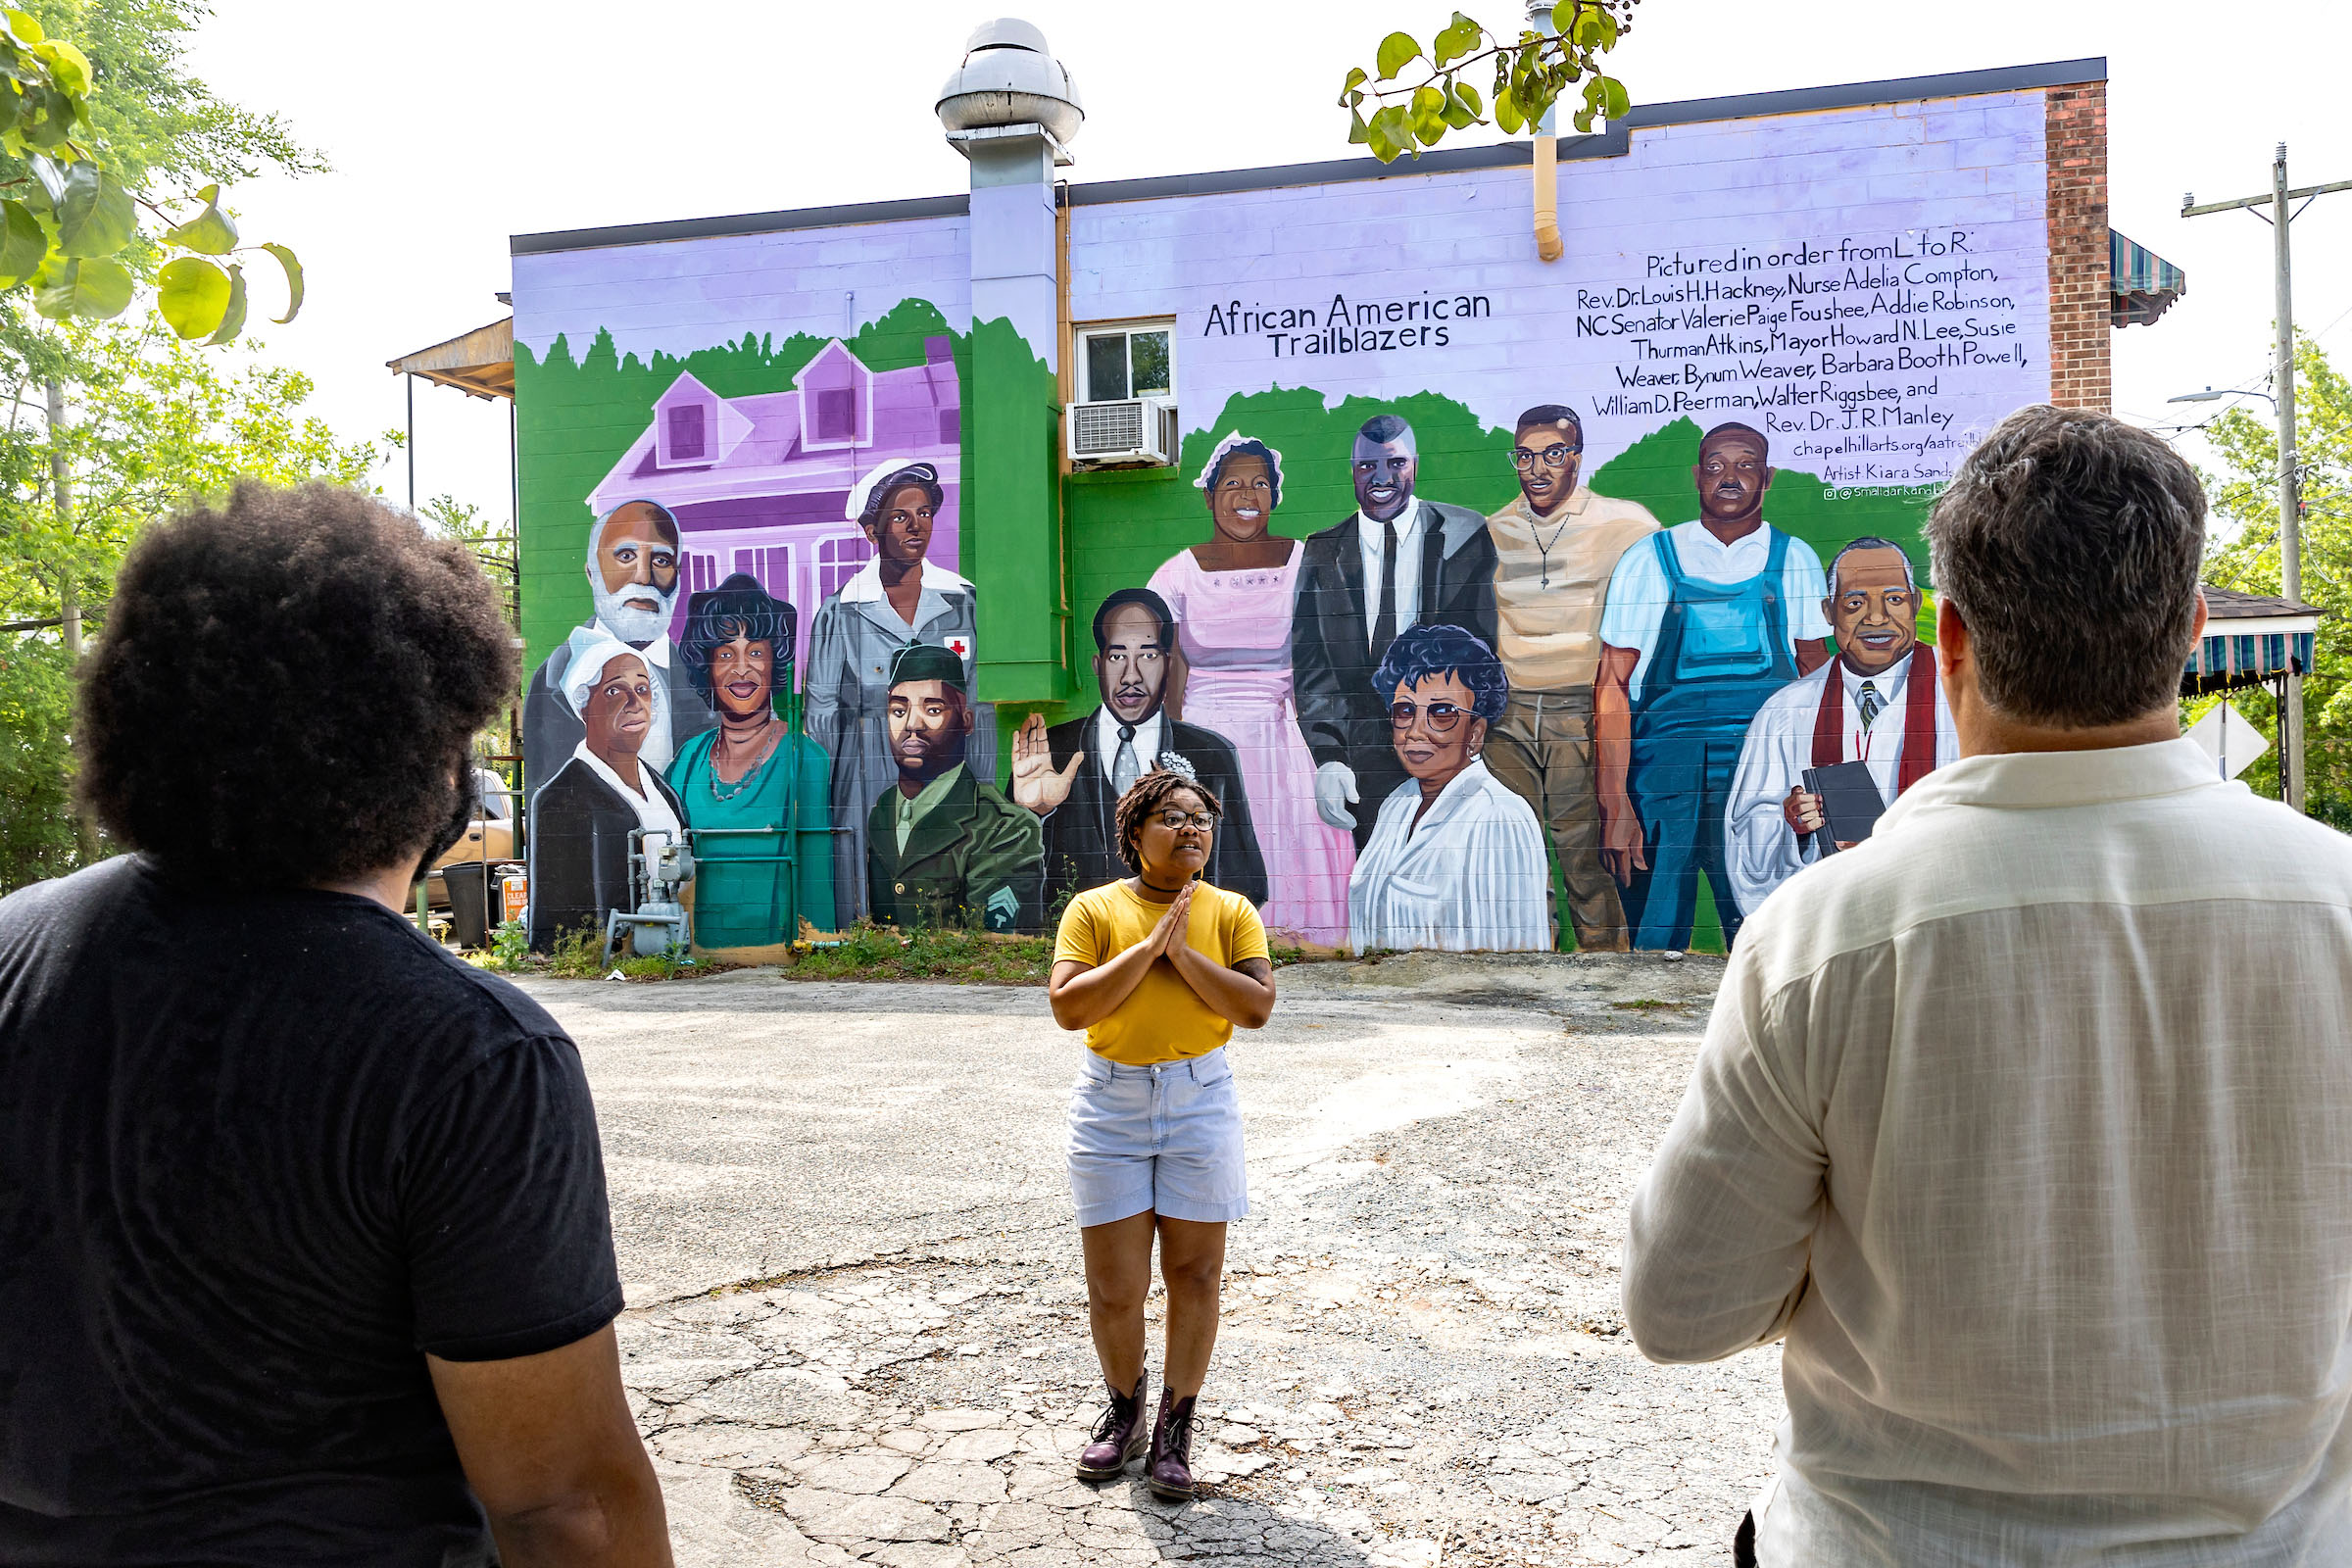 A person standing in front a mural of African American trailblazers.